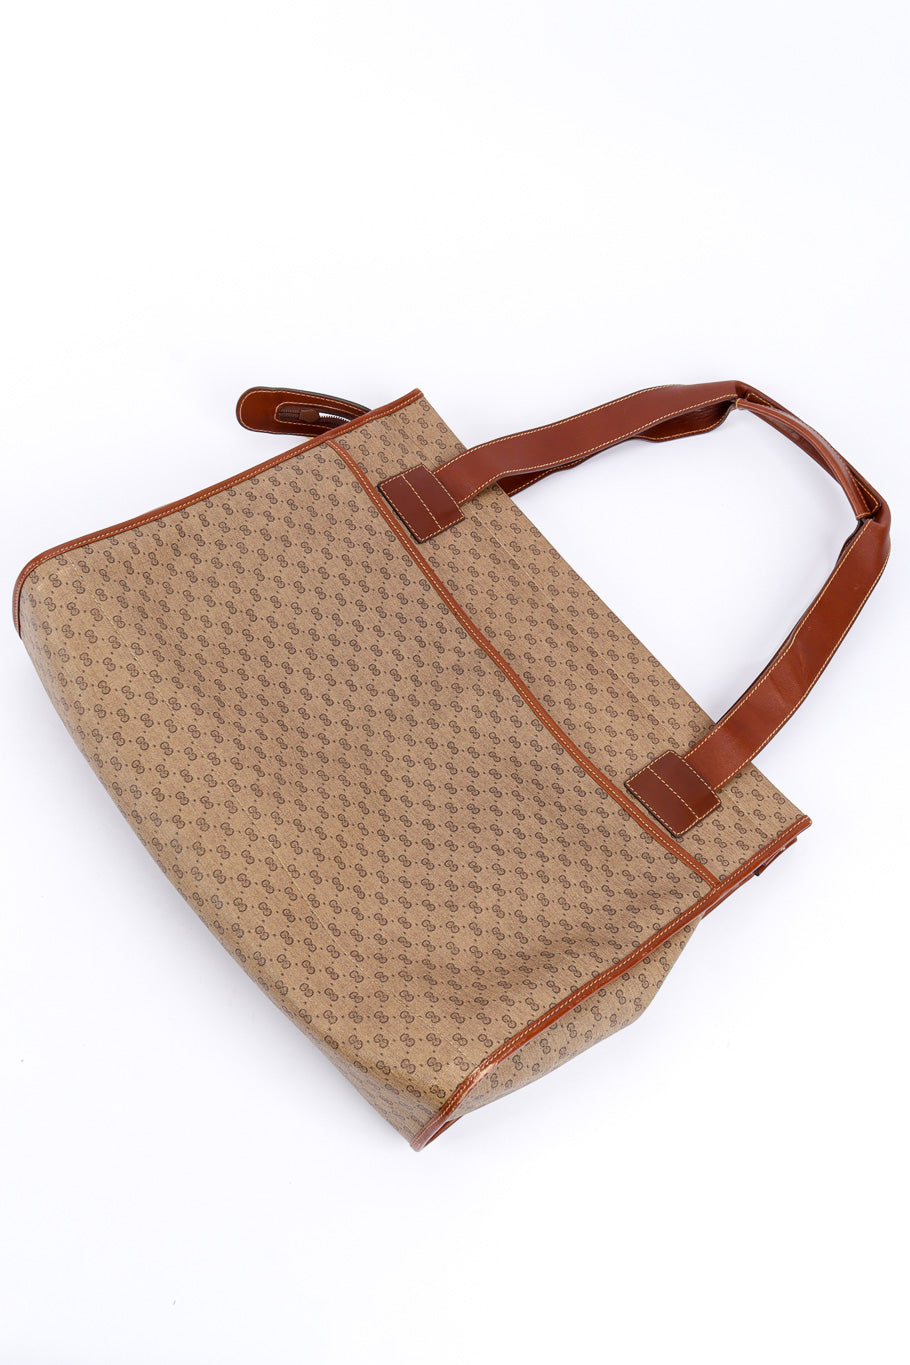 Coated Canvas & Leather GG Tote by Gucci back @recessla